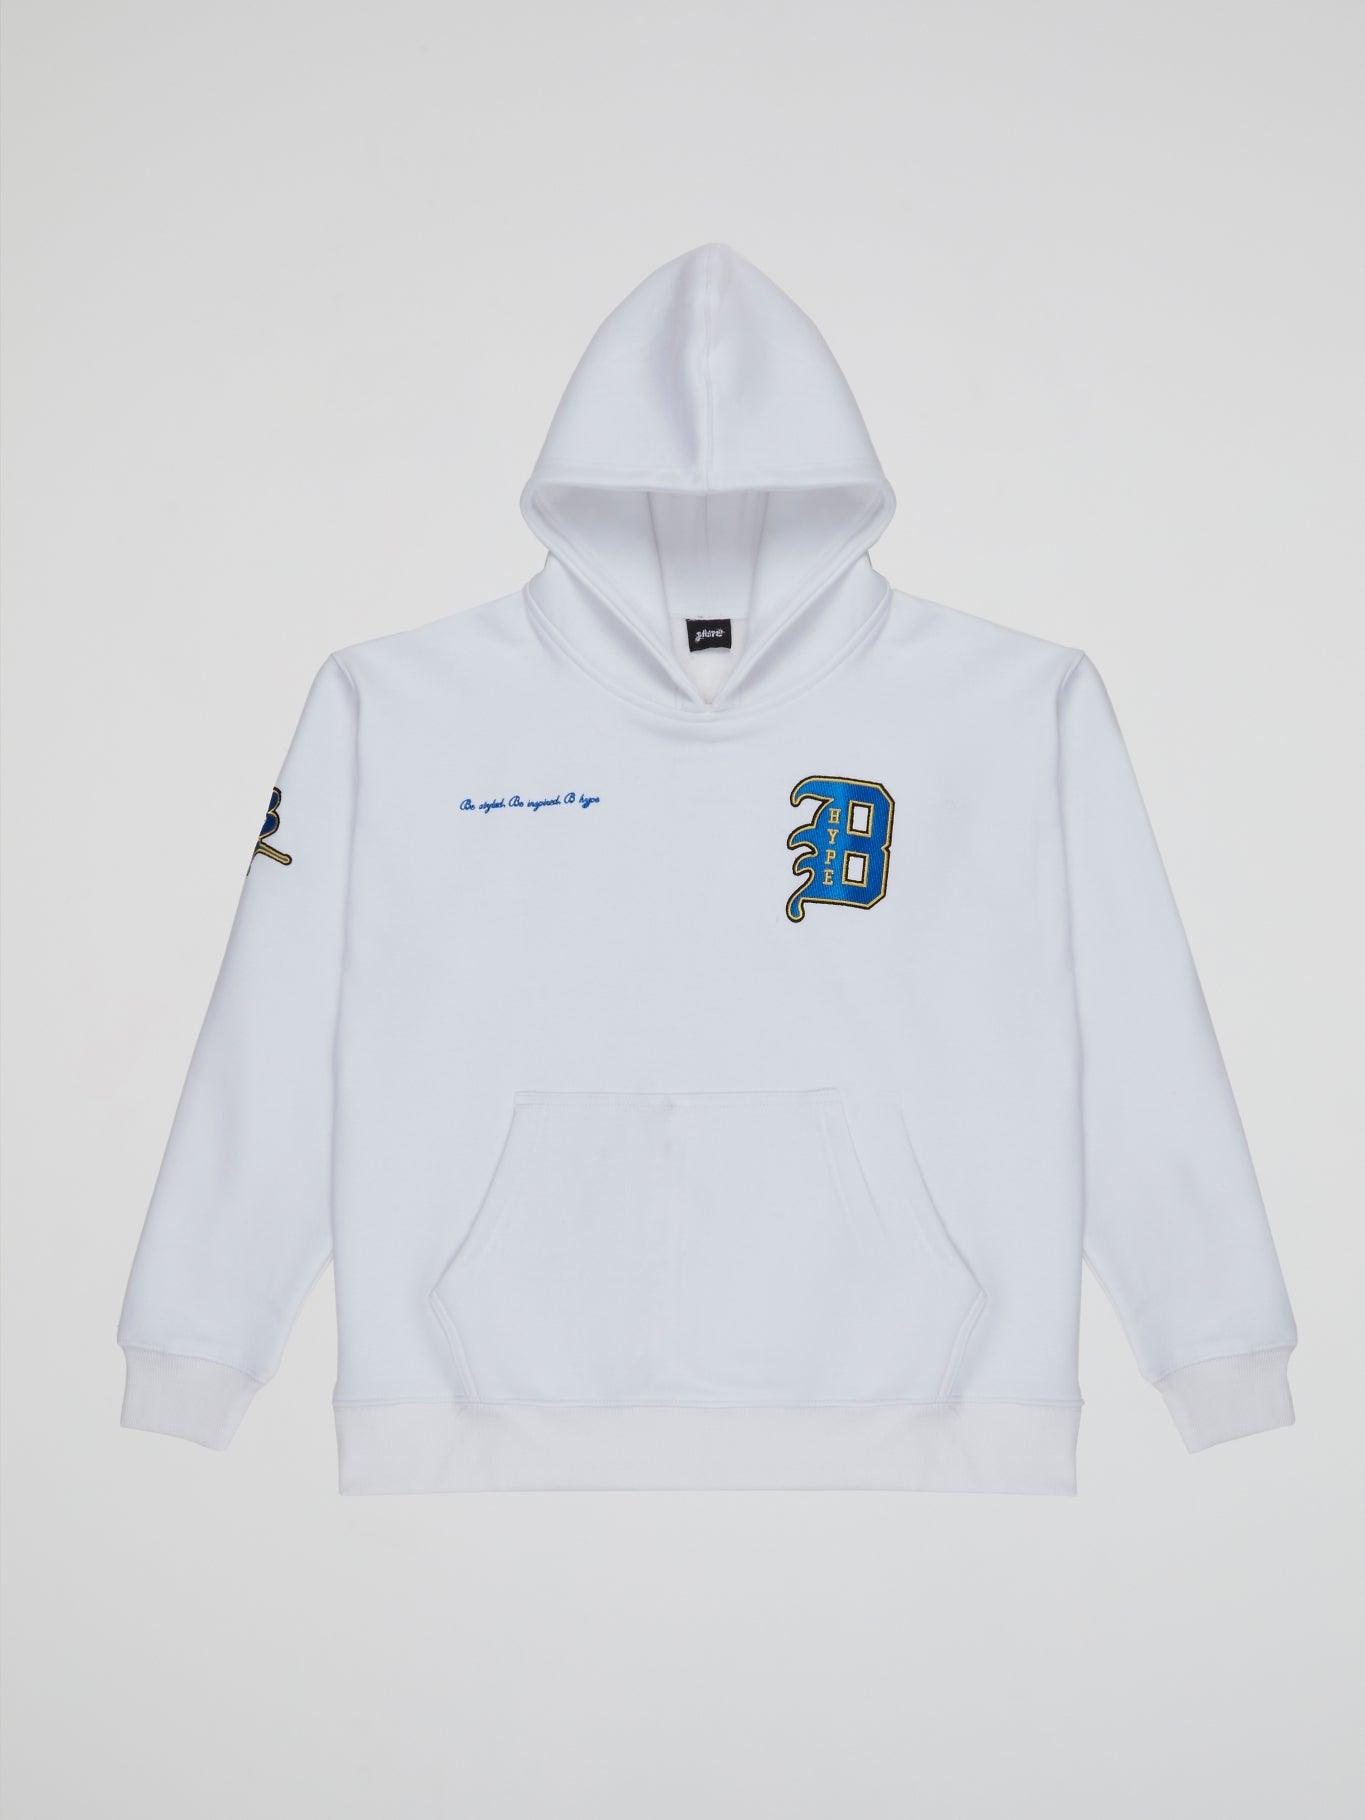 BHYPE WHITE HOODIE VARSITY COLLECTION - B-Hype Society